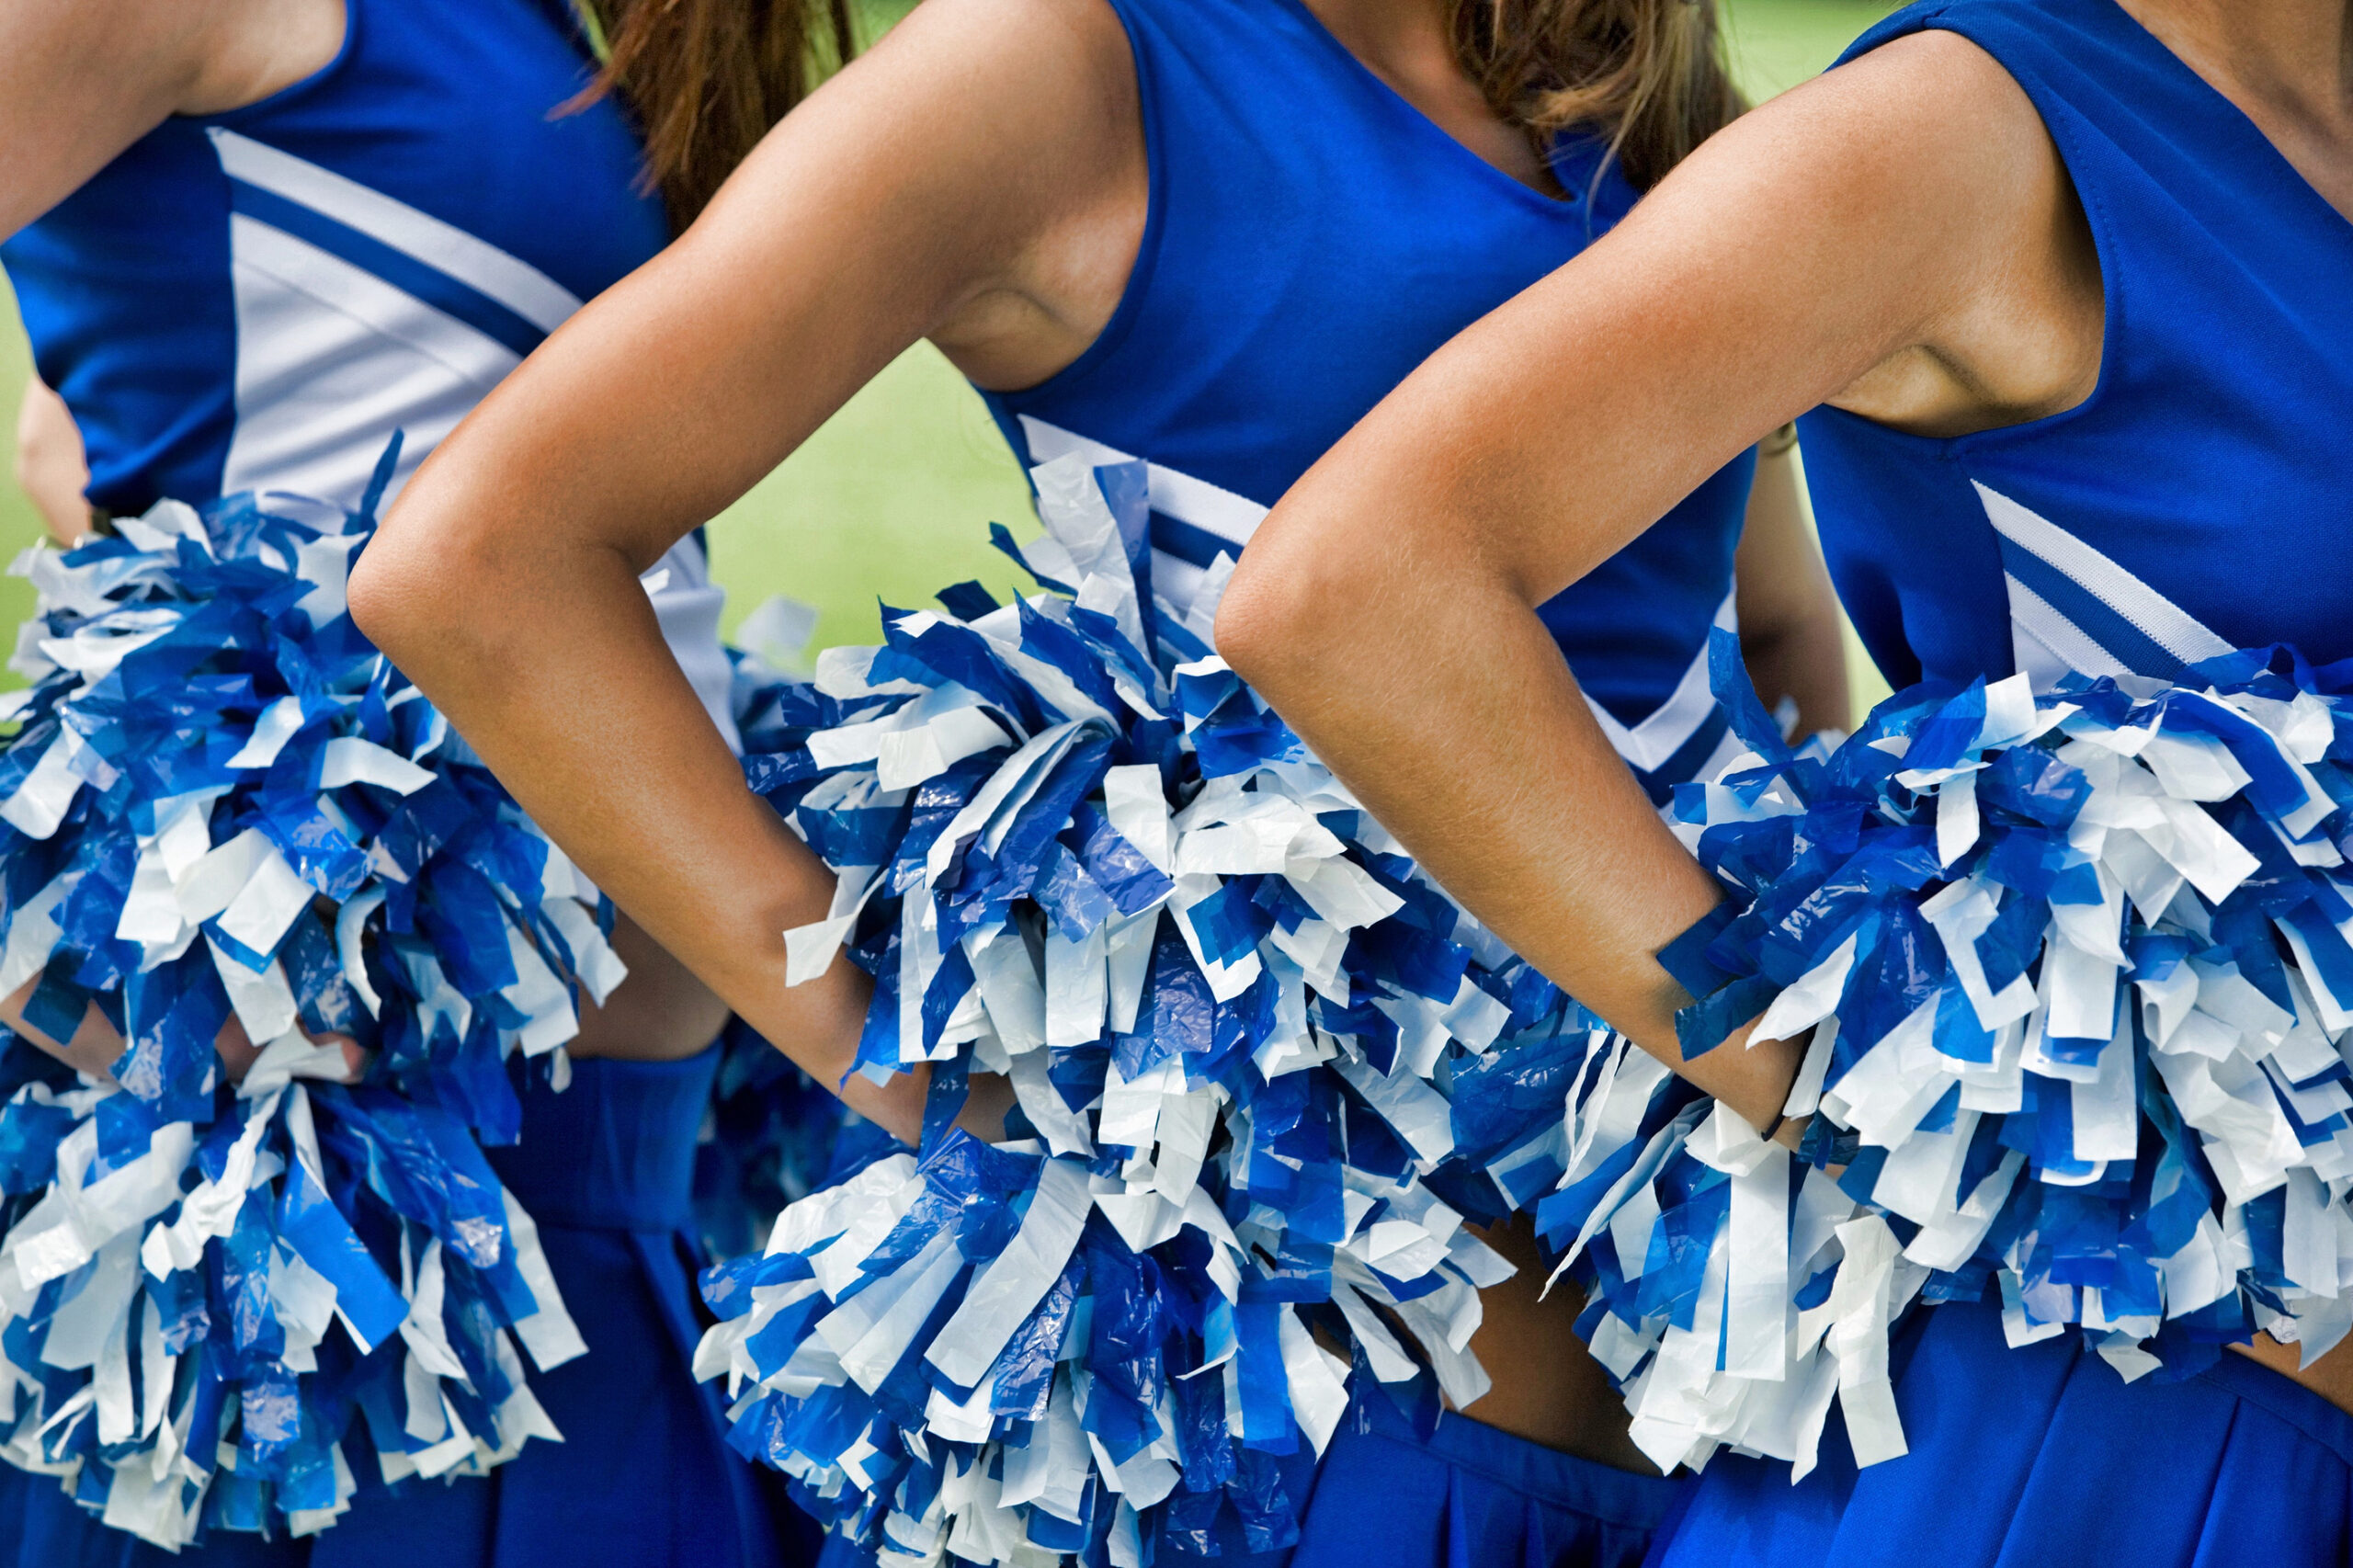 Sex Abuse Allegations Spread Against Cheerleading Industry pic